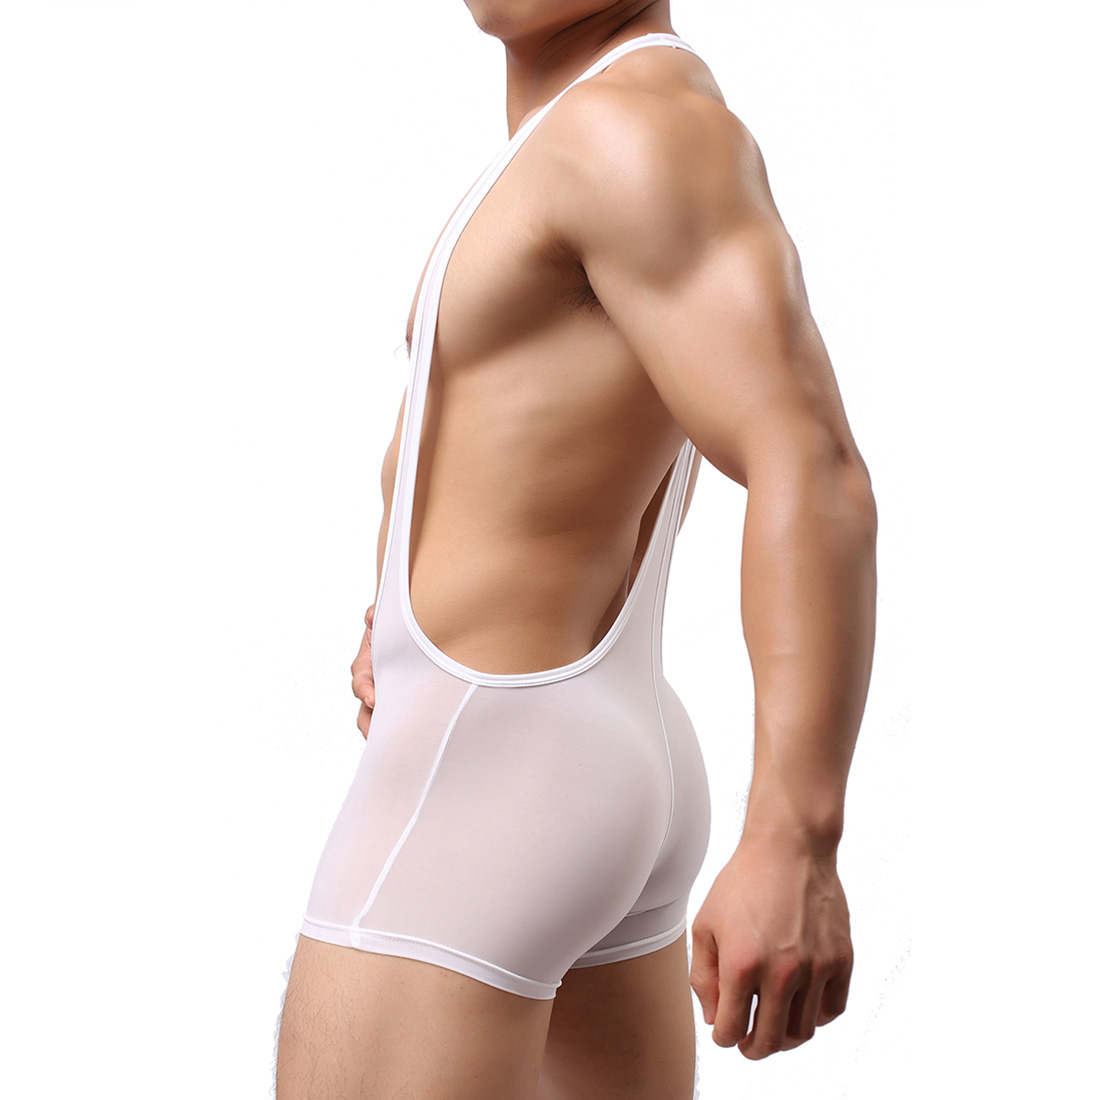 Men's Sexy Lingerie Underwear Sport Fitness One-pieces Swimsuit Wrestling Dress WH41 White XL